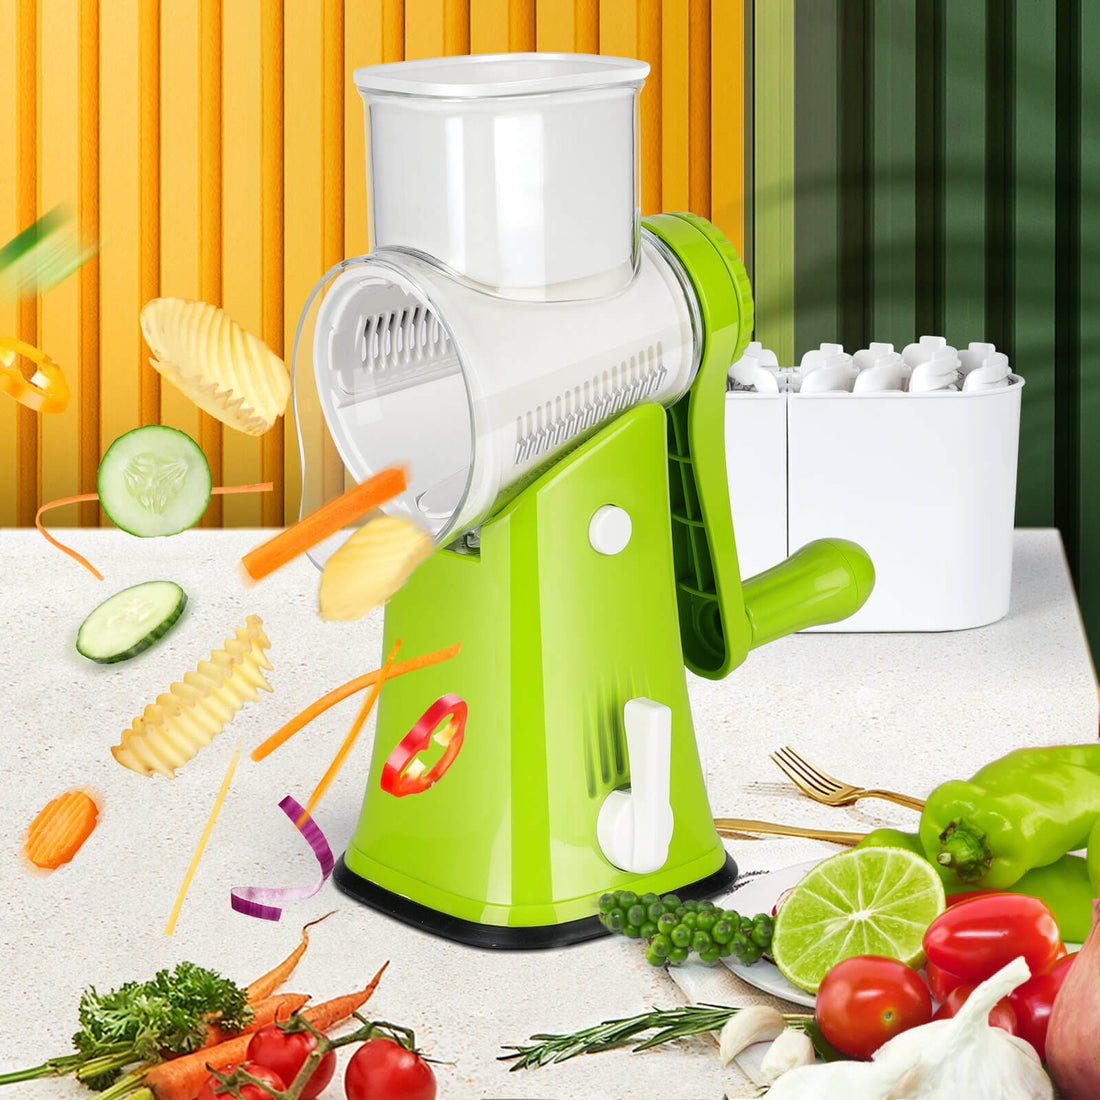 Masthome Mandoline Food Slicer Adjustable Thickness for Cheese Fruits  Vegetables Stainless Steel Food Cutter Slicer Dicer with Extra Brush and  Blade